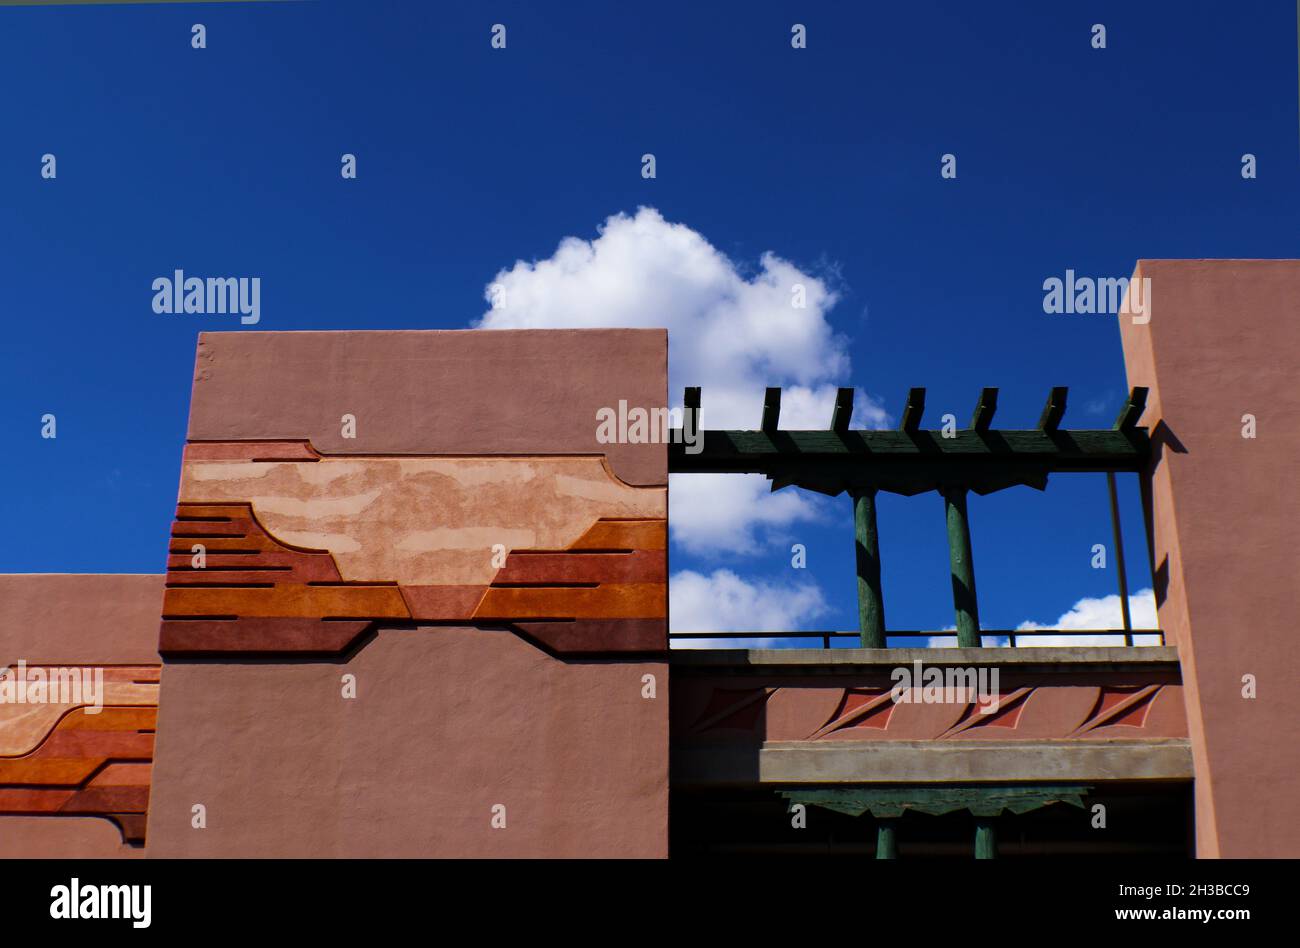 Architecture with southwestern design in stucco against blue sky with clouds, Santa Fe, New Mexico Stock Photo